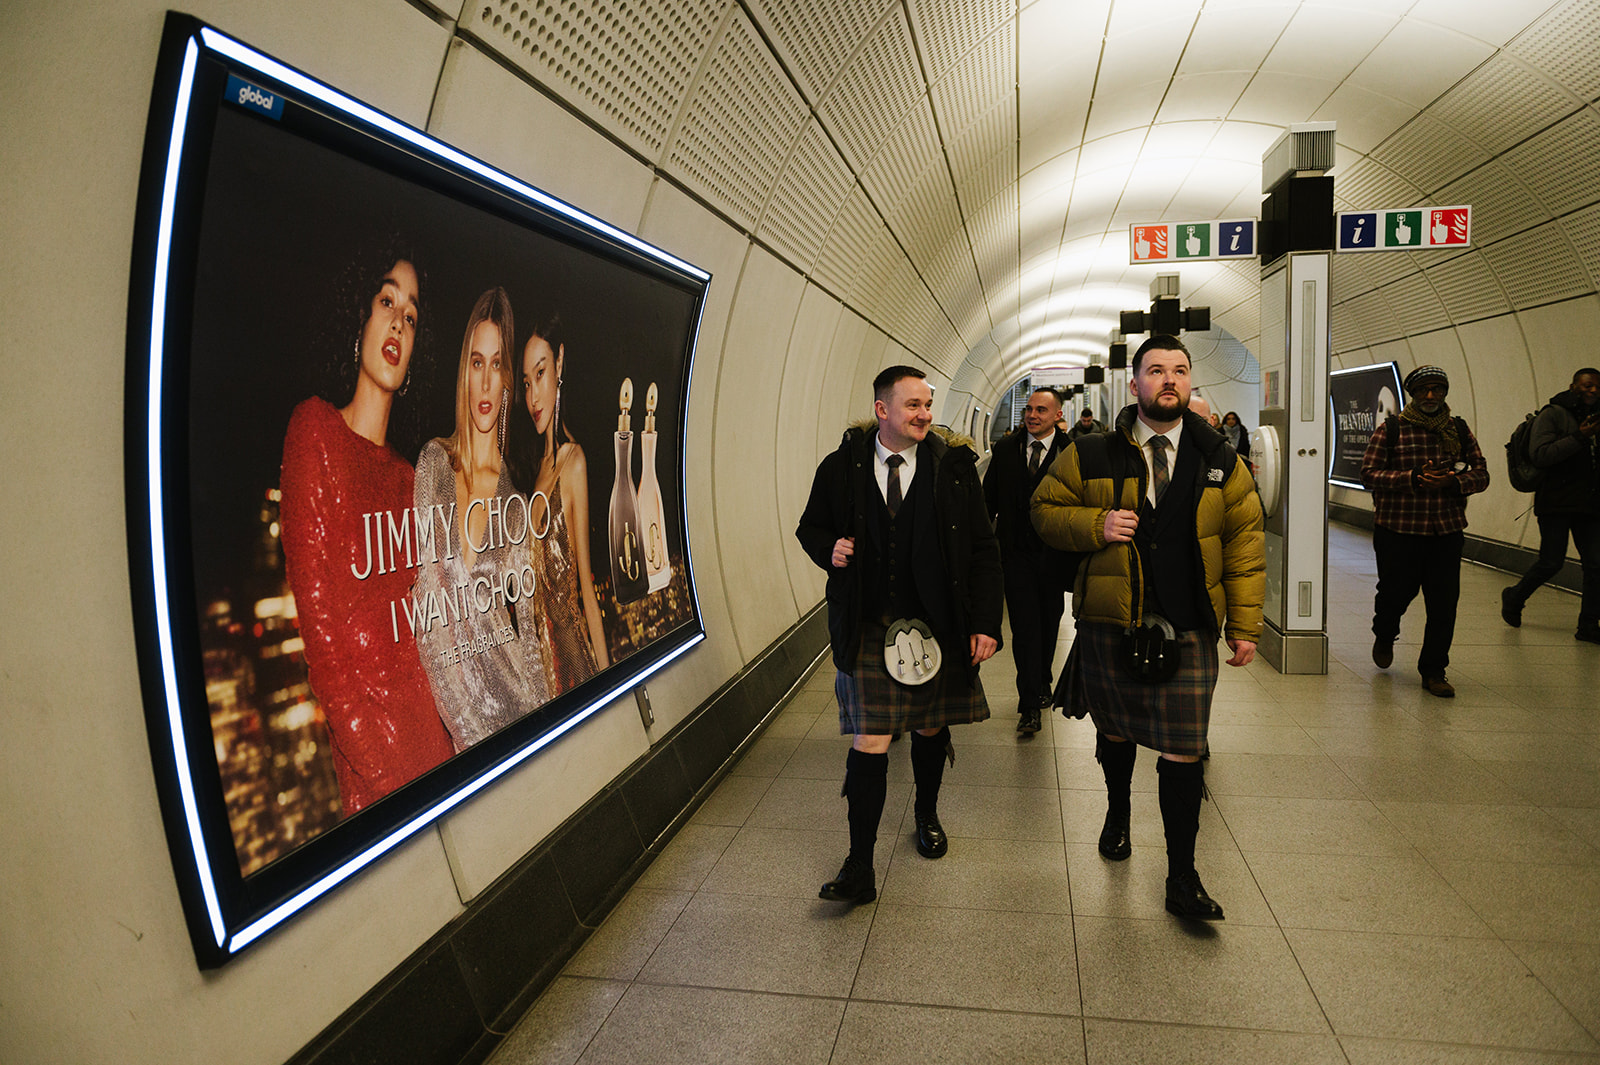 Groom and his ushers walking through the tube in London